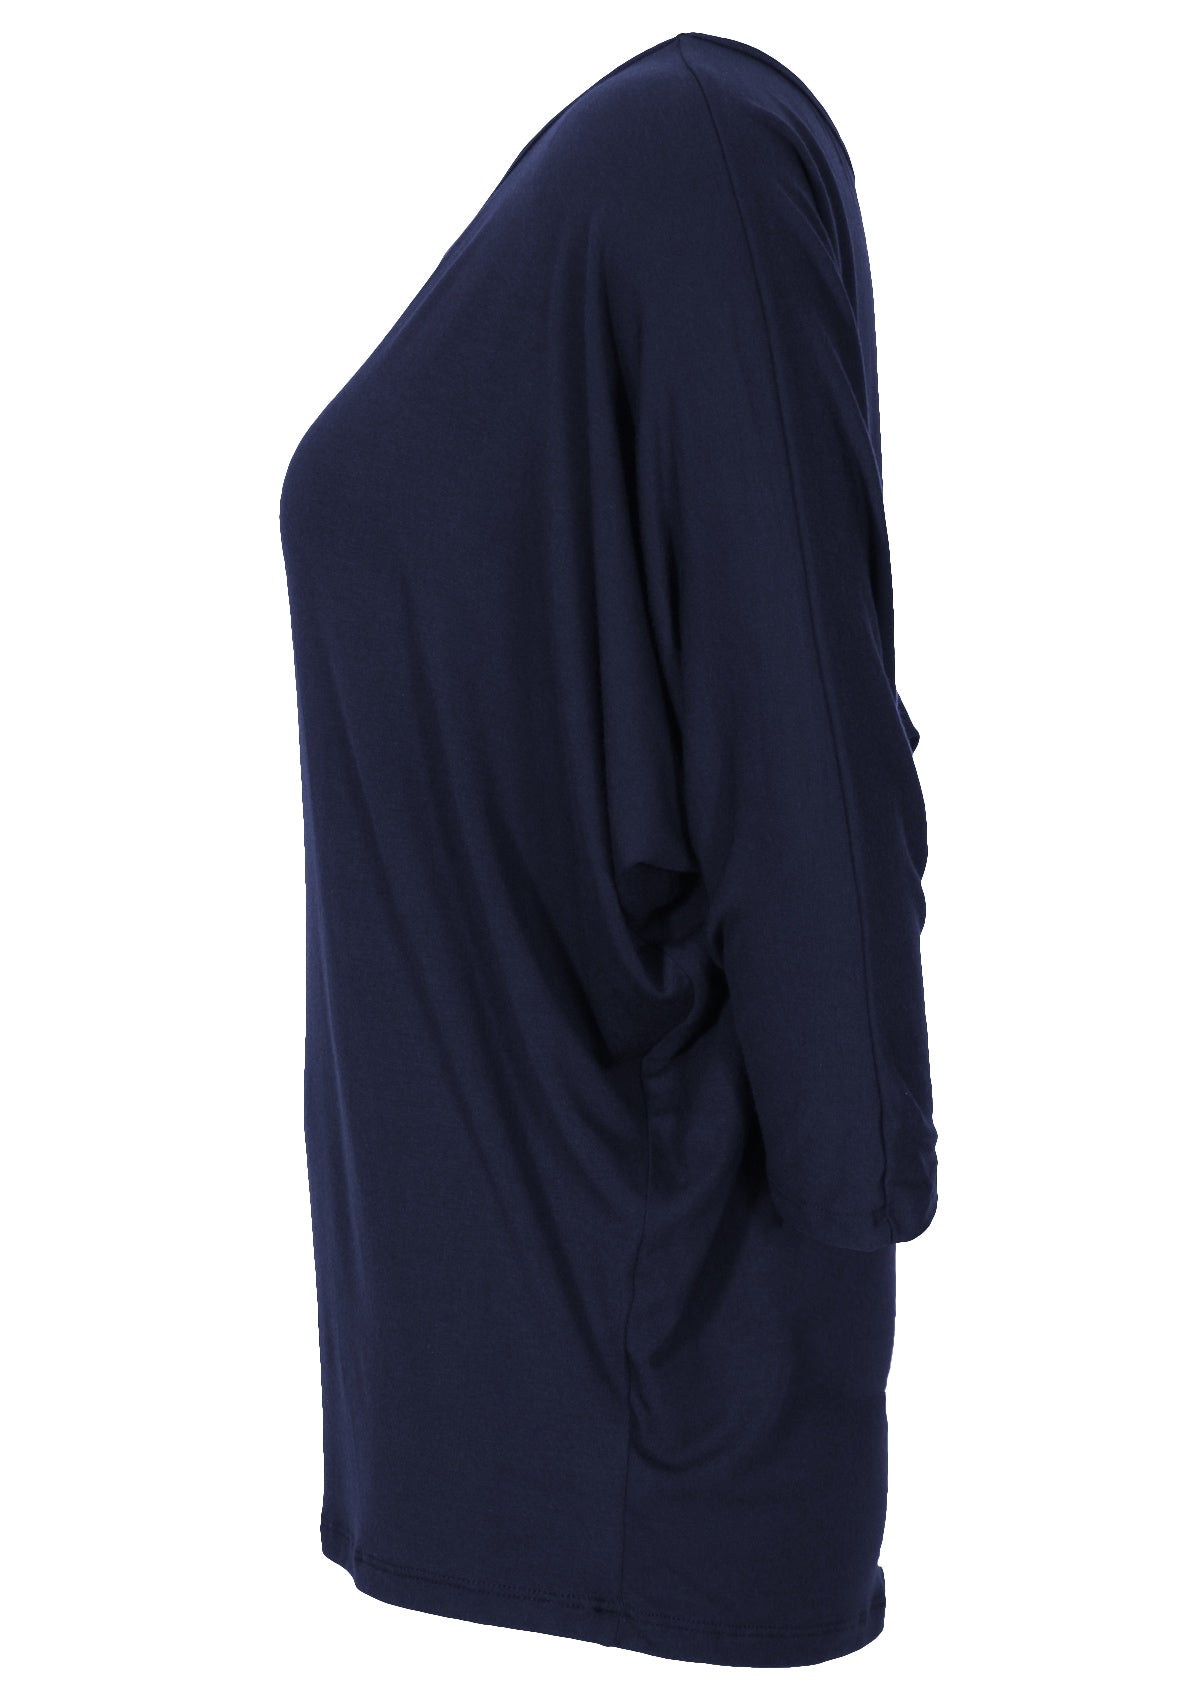 Side view of women's 3/4 sleeve rayon batwing round neckline navy blue top.